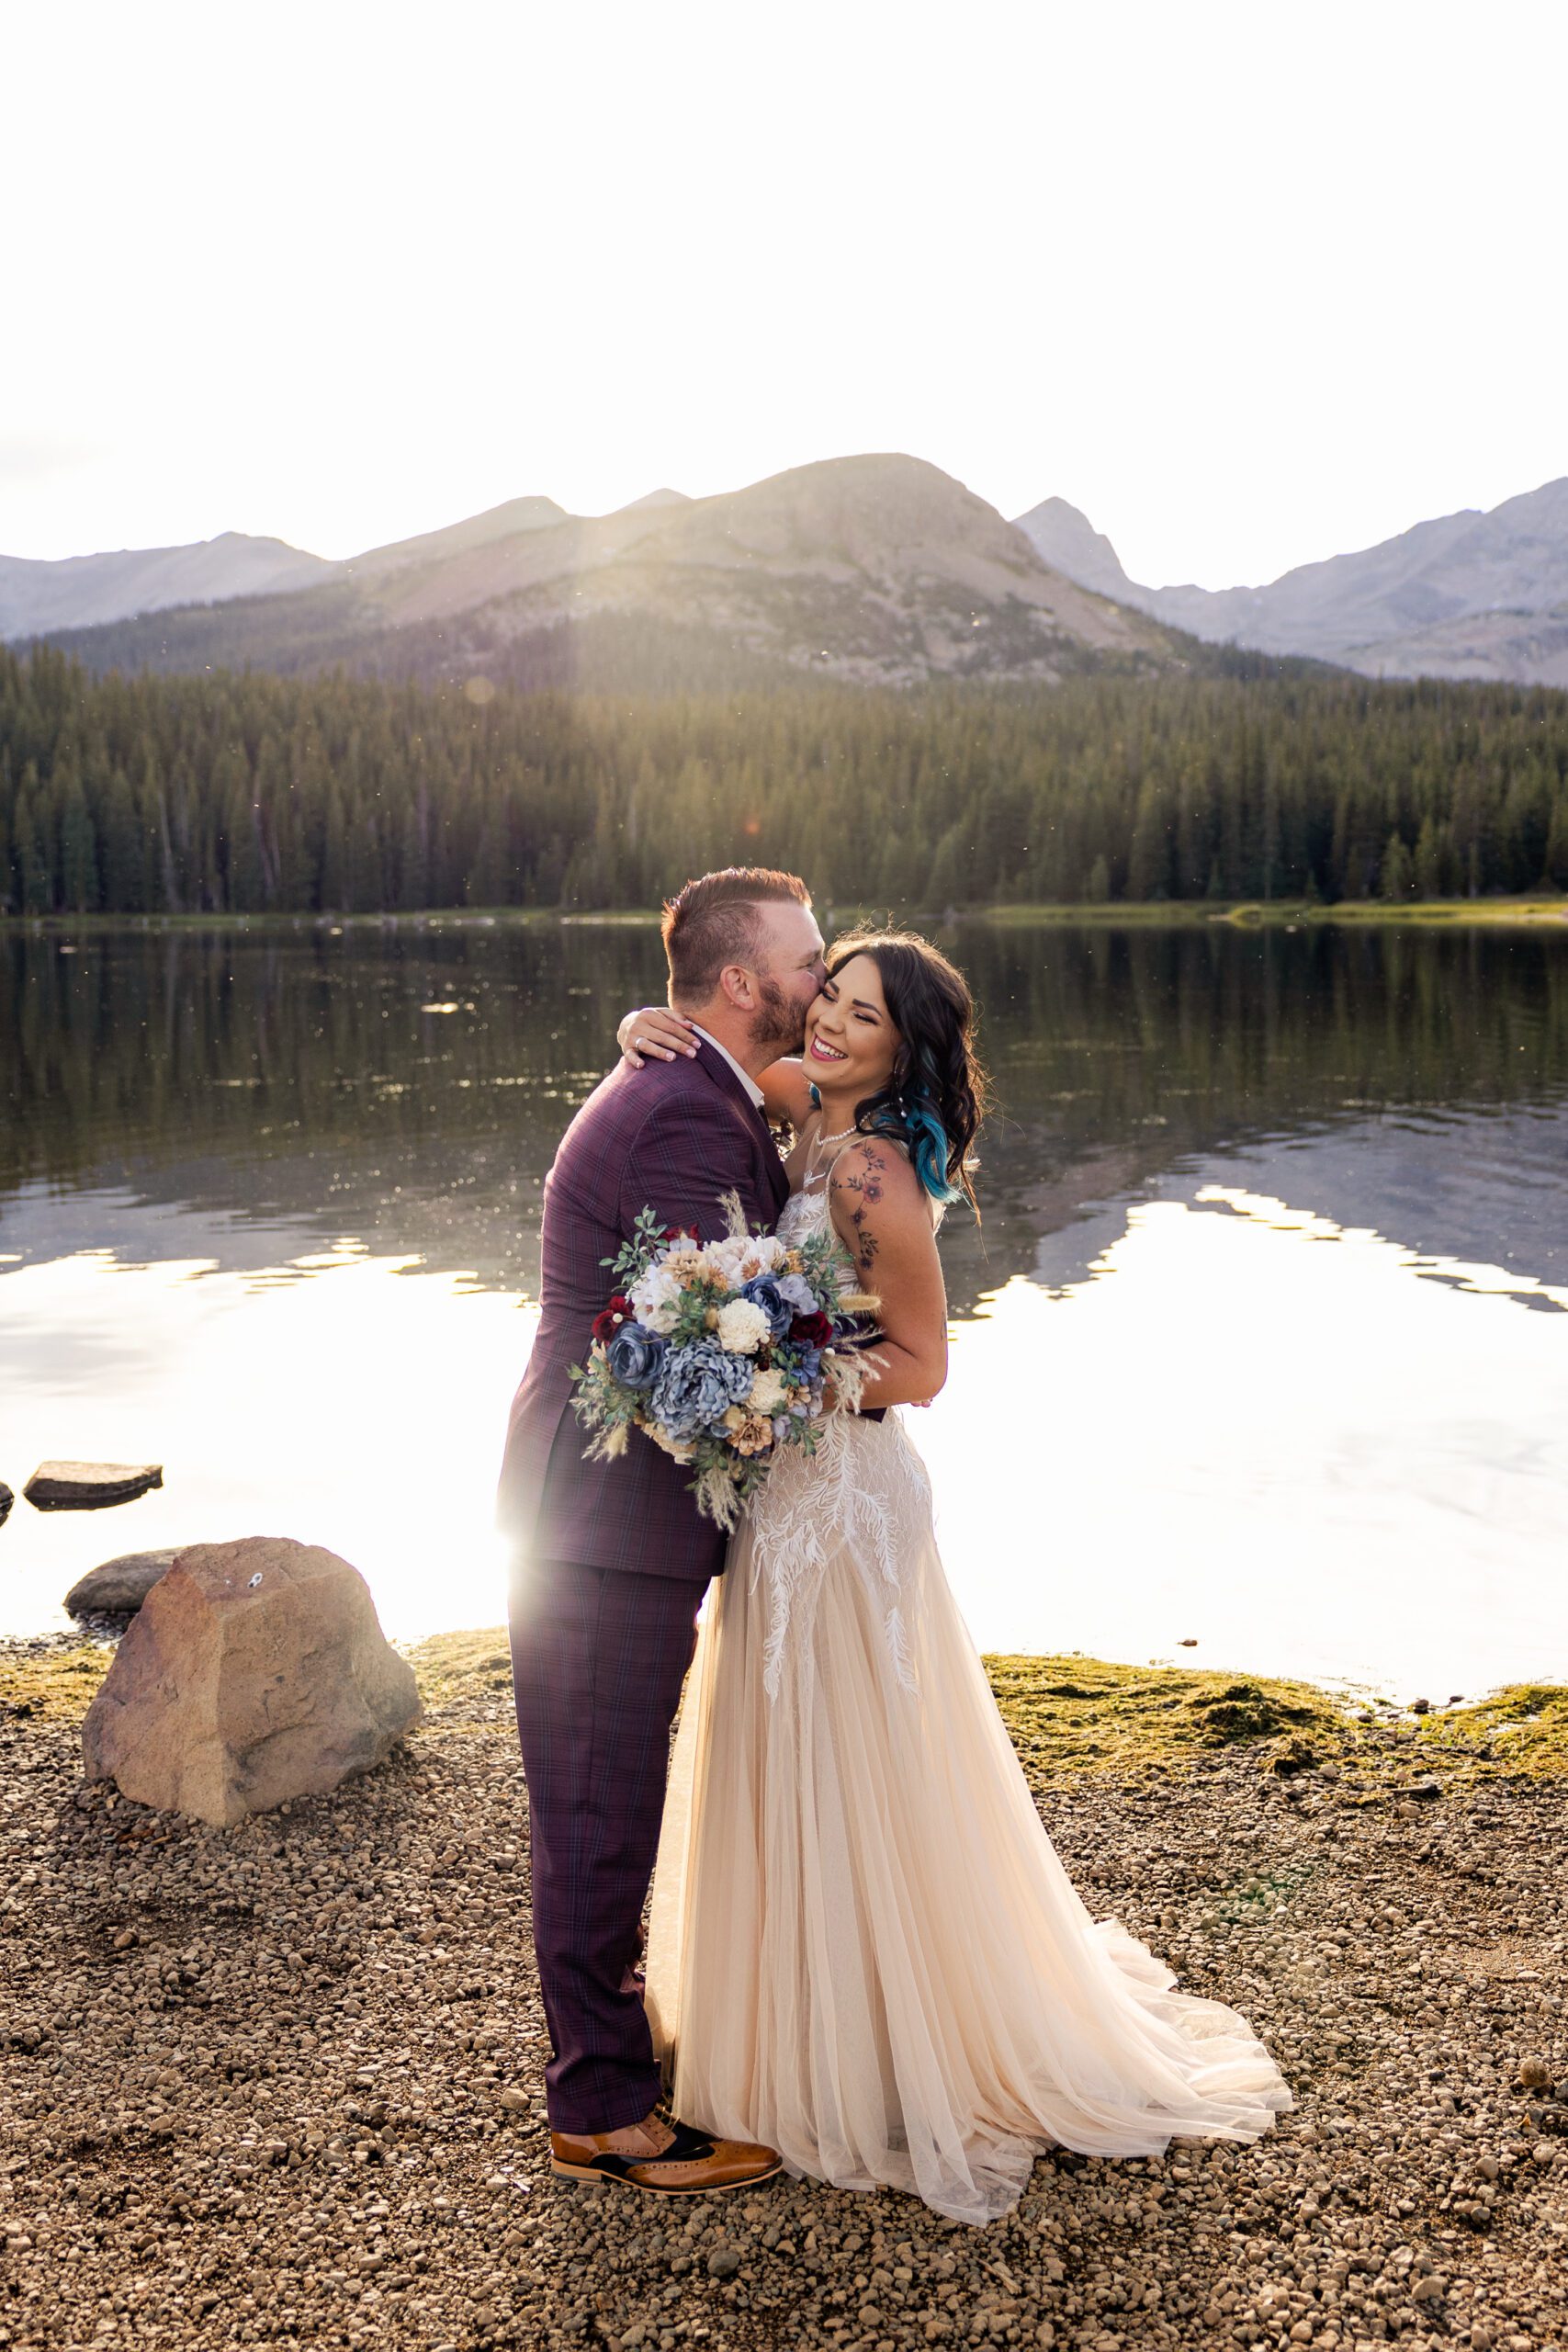 The groom kisses his bride on the cheeks near the lake at their Brainard Lake Elopement.